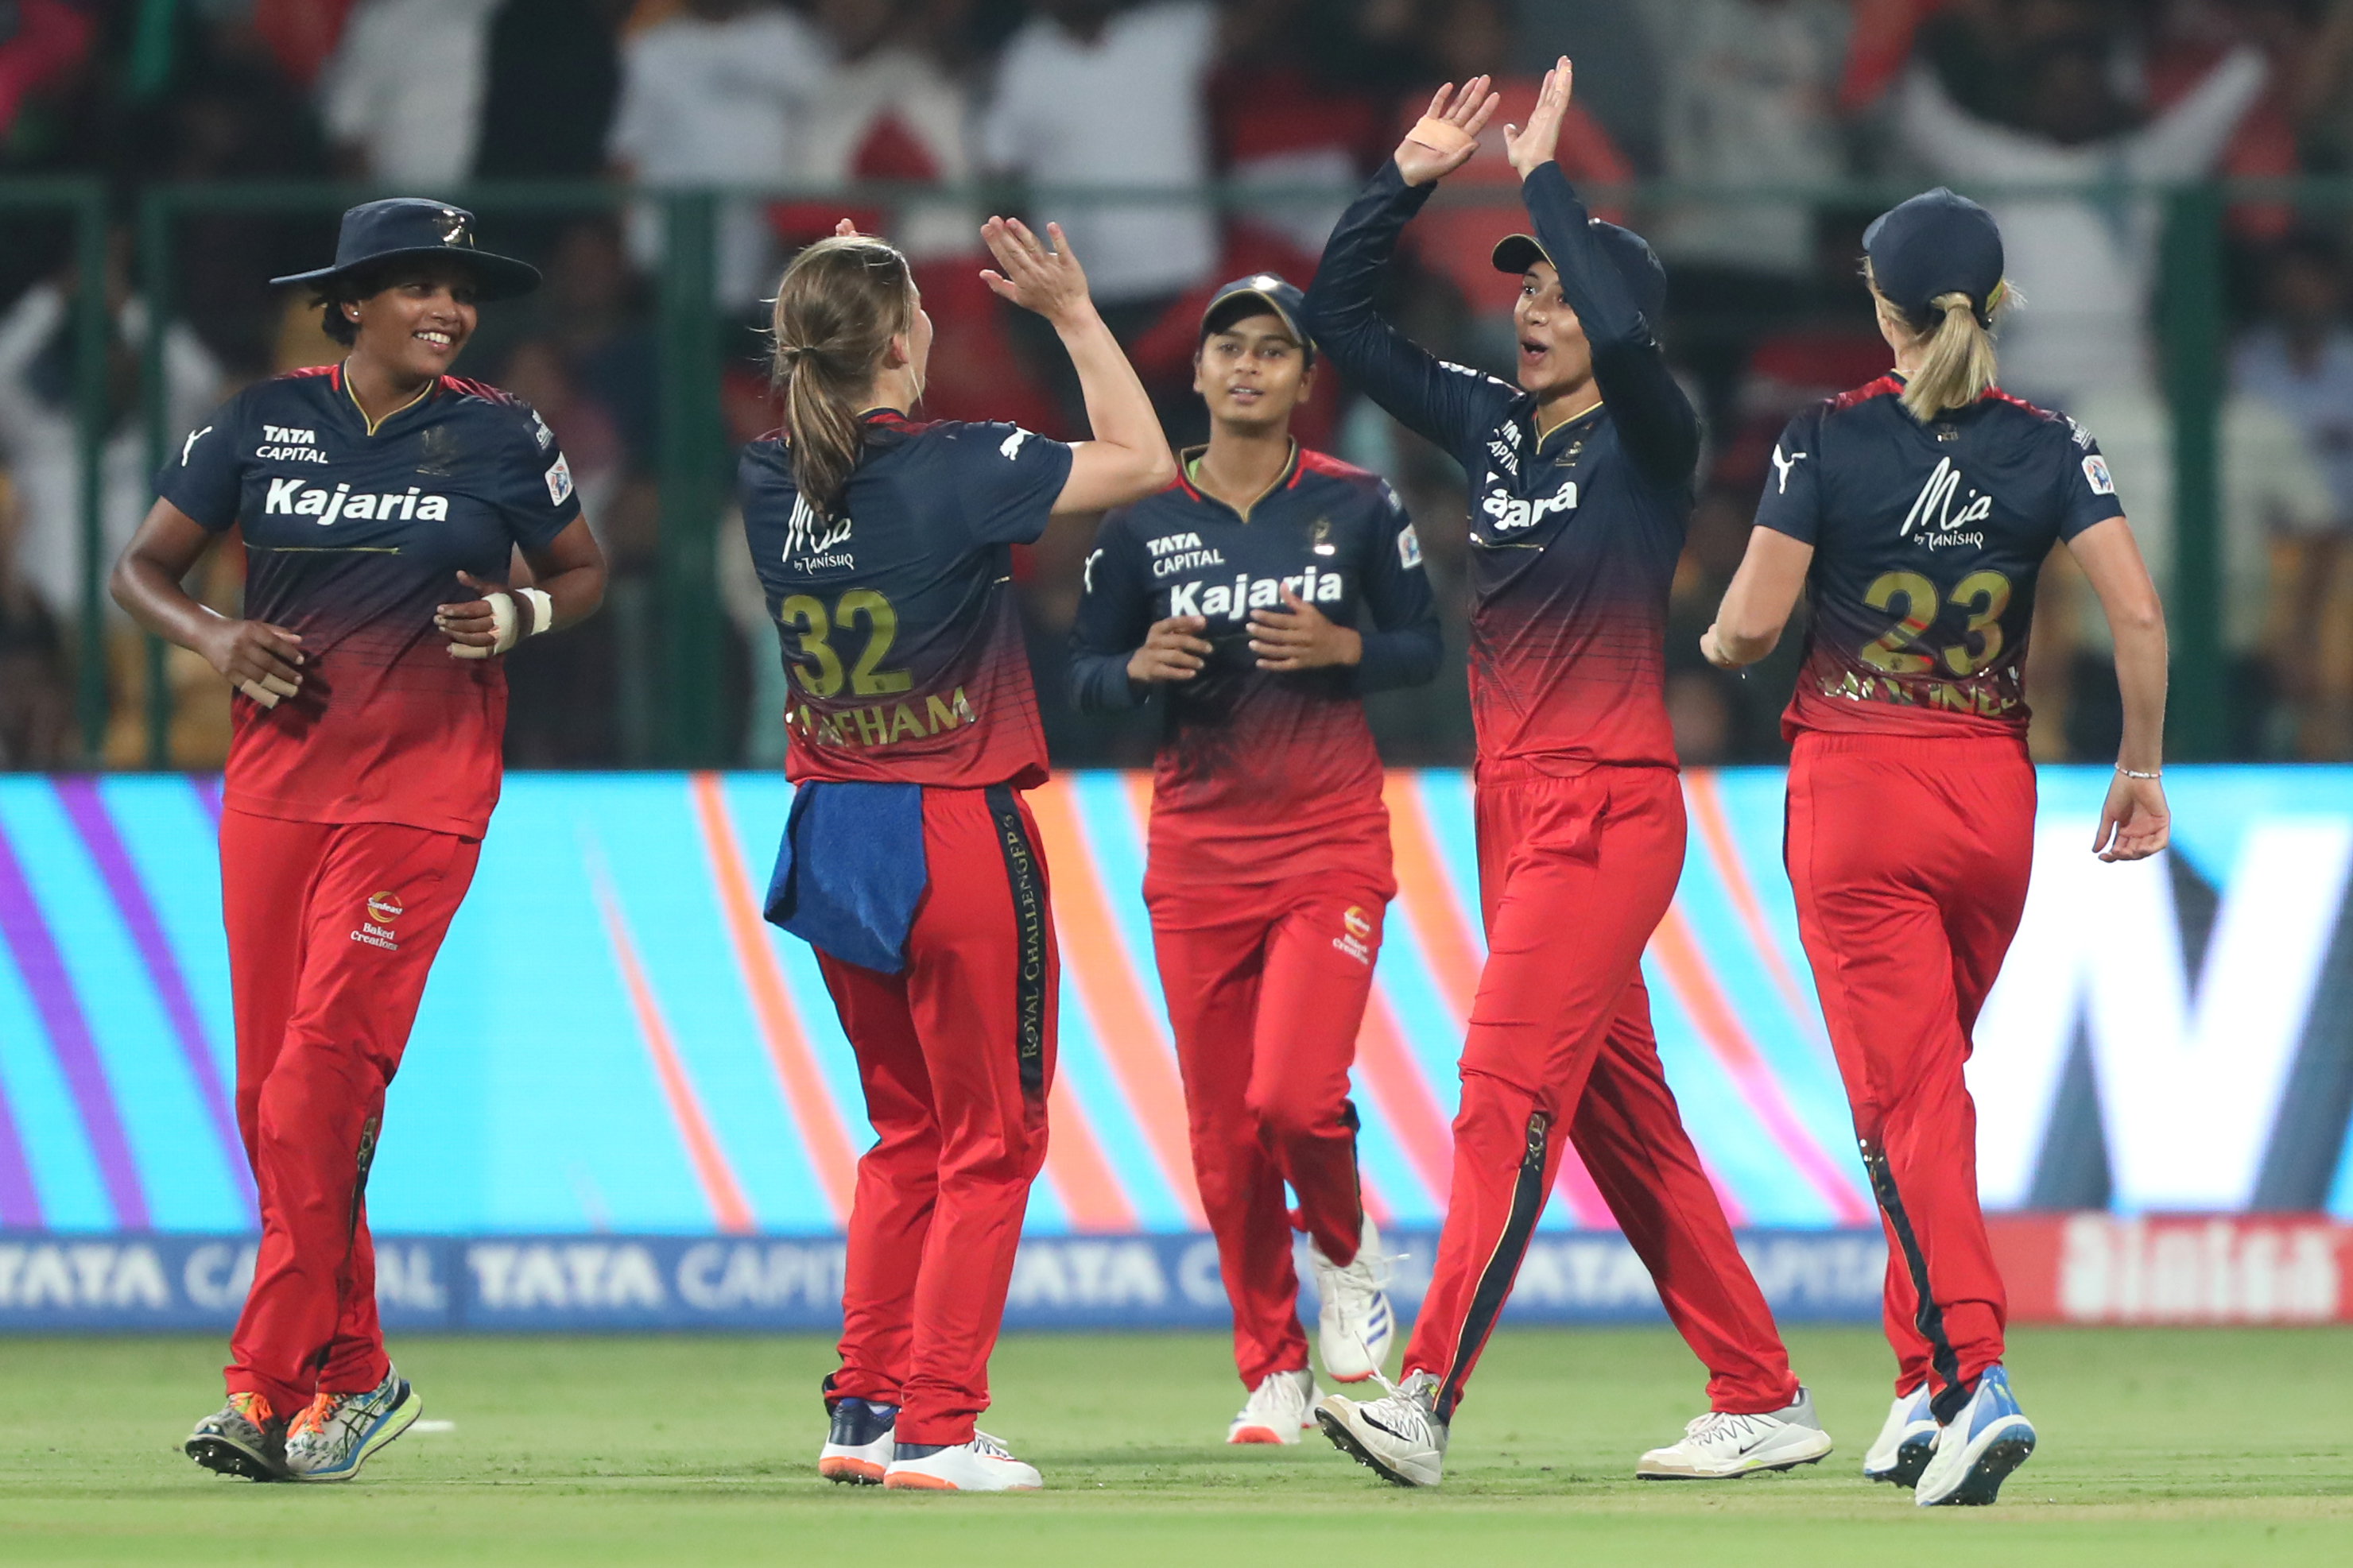 RCB-W won the natch by 8 wickets